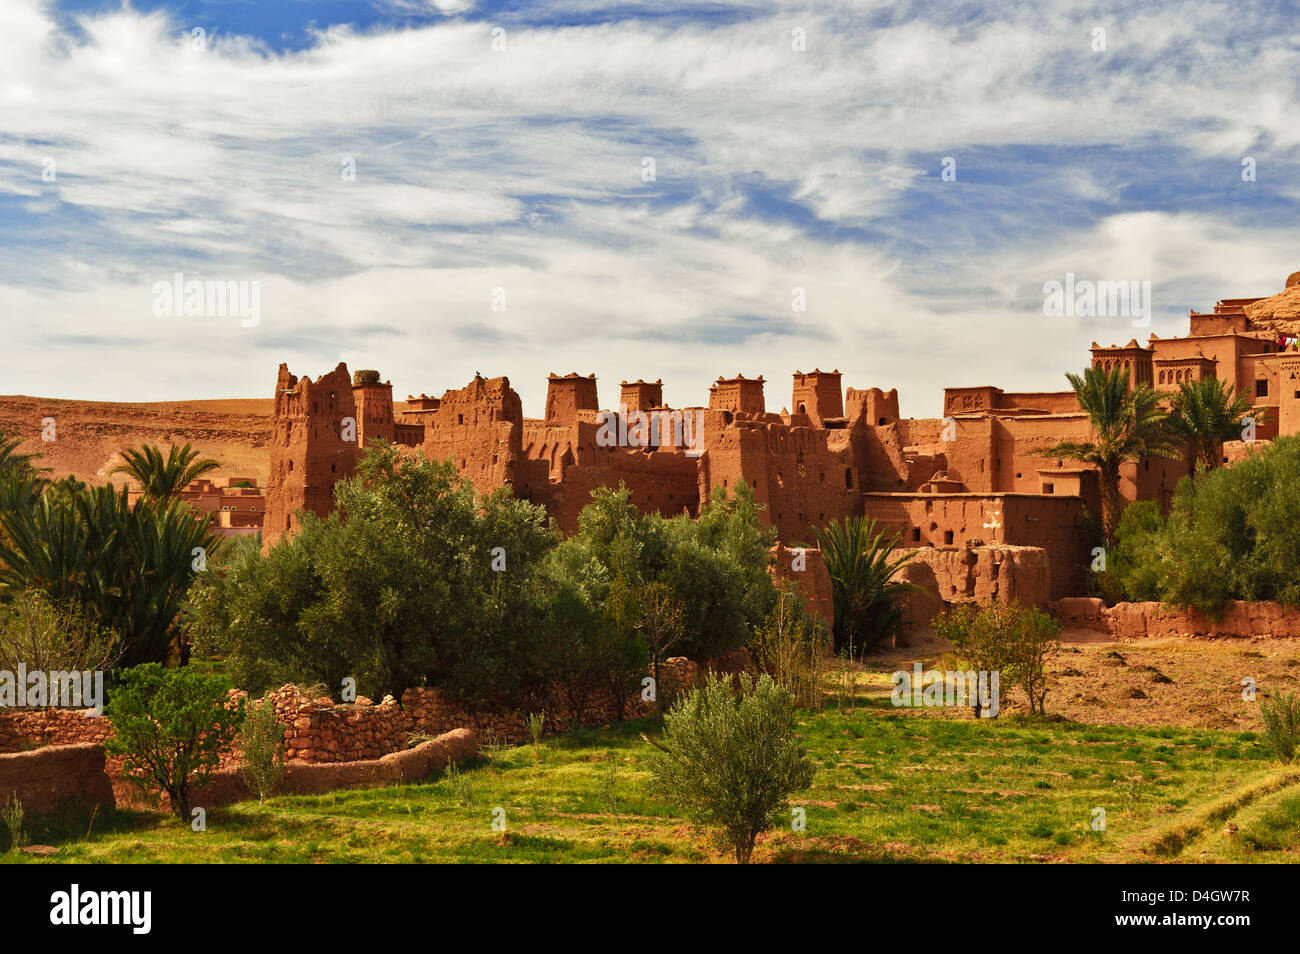 Kasbah of Ait-Benhaddou, UNESCO World Heritage Site, Morocco, North Africa Stock Photo